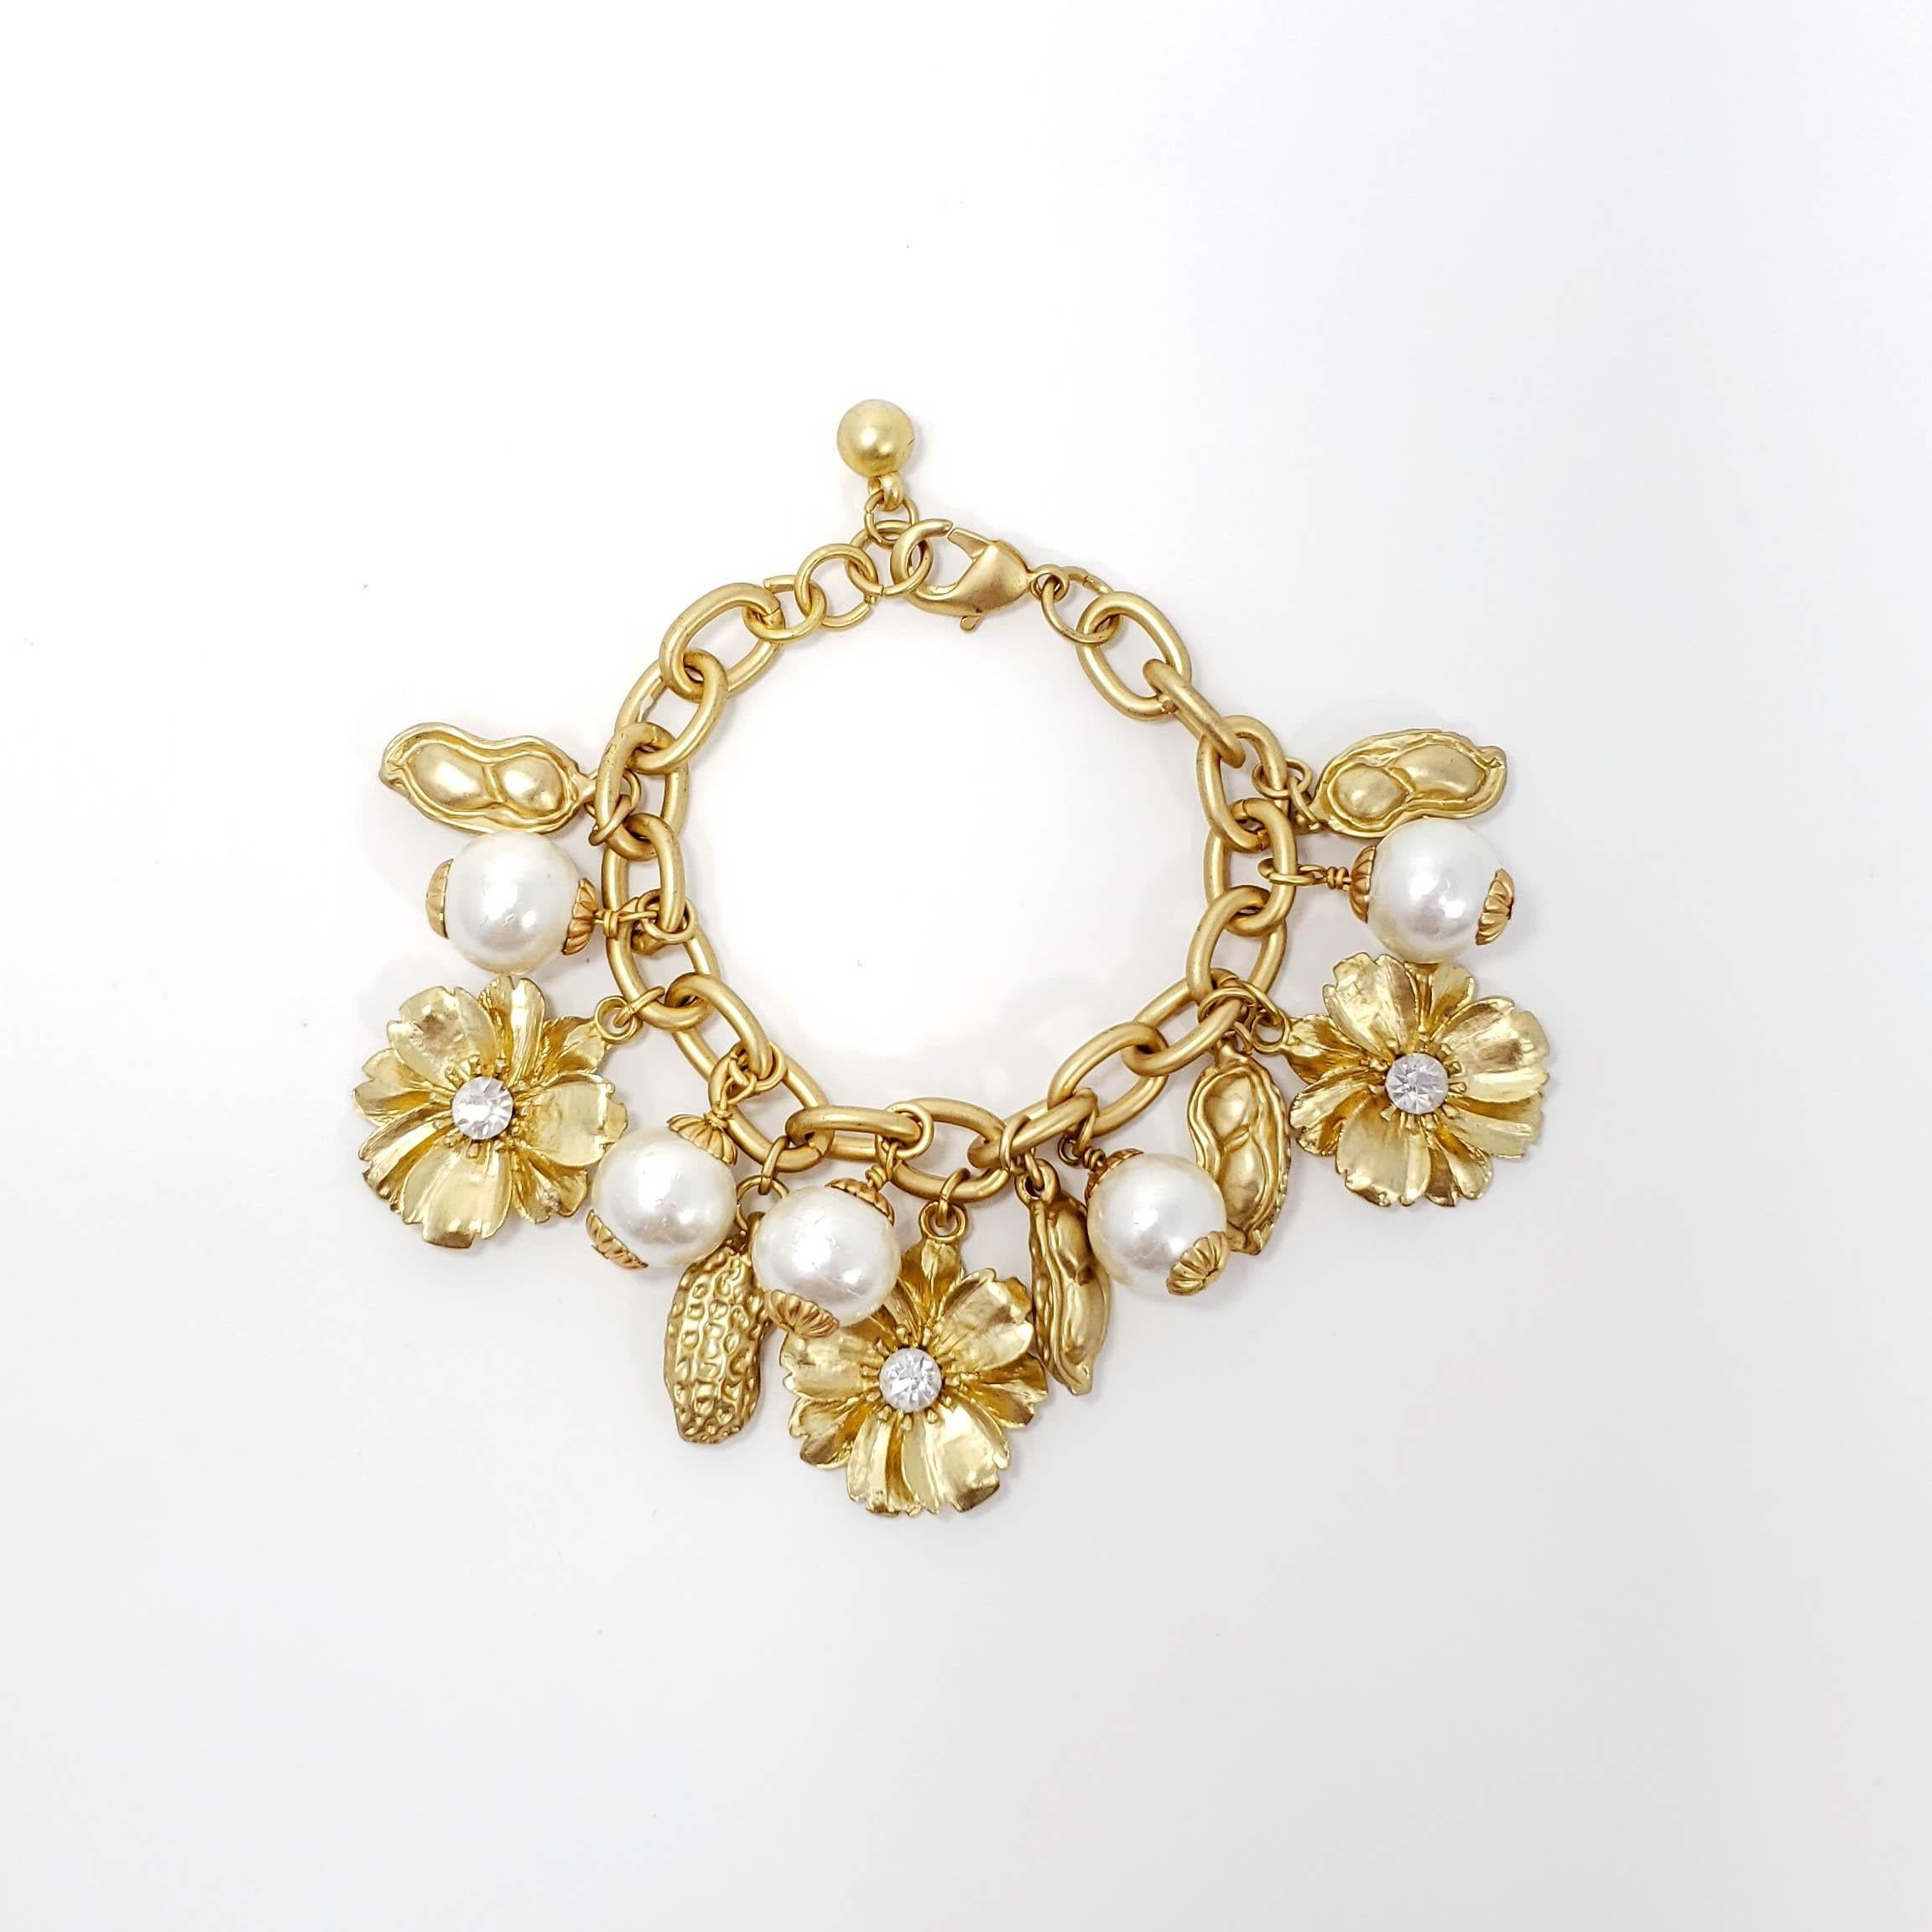 Charm chain bracelet in gold tone, with clusters of peanut, flower, and faux white pearl charms.

Excellent condition. Estimated production - mid to late 1900s.

Charms approx 1.5cm in length each.

Bracelet length: 7 to 8 in / 18 to 20 cm, includes